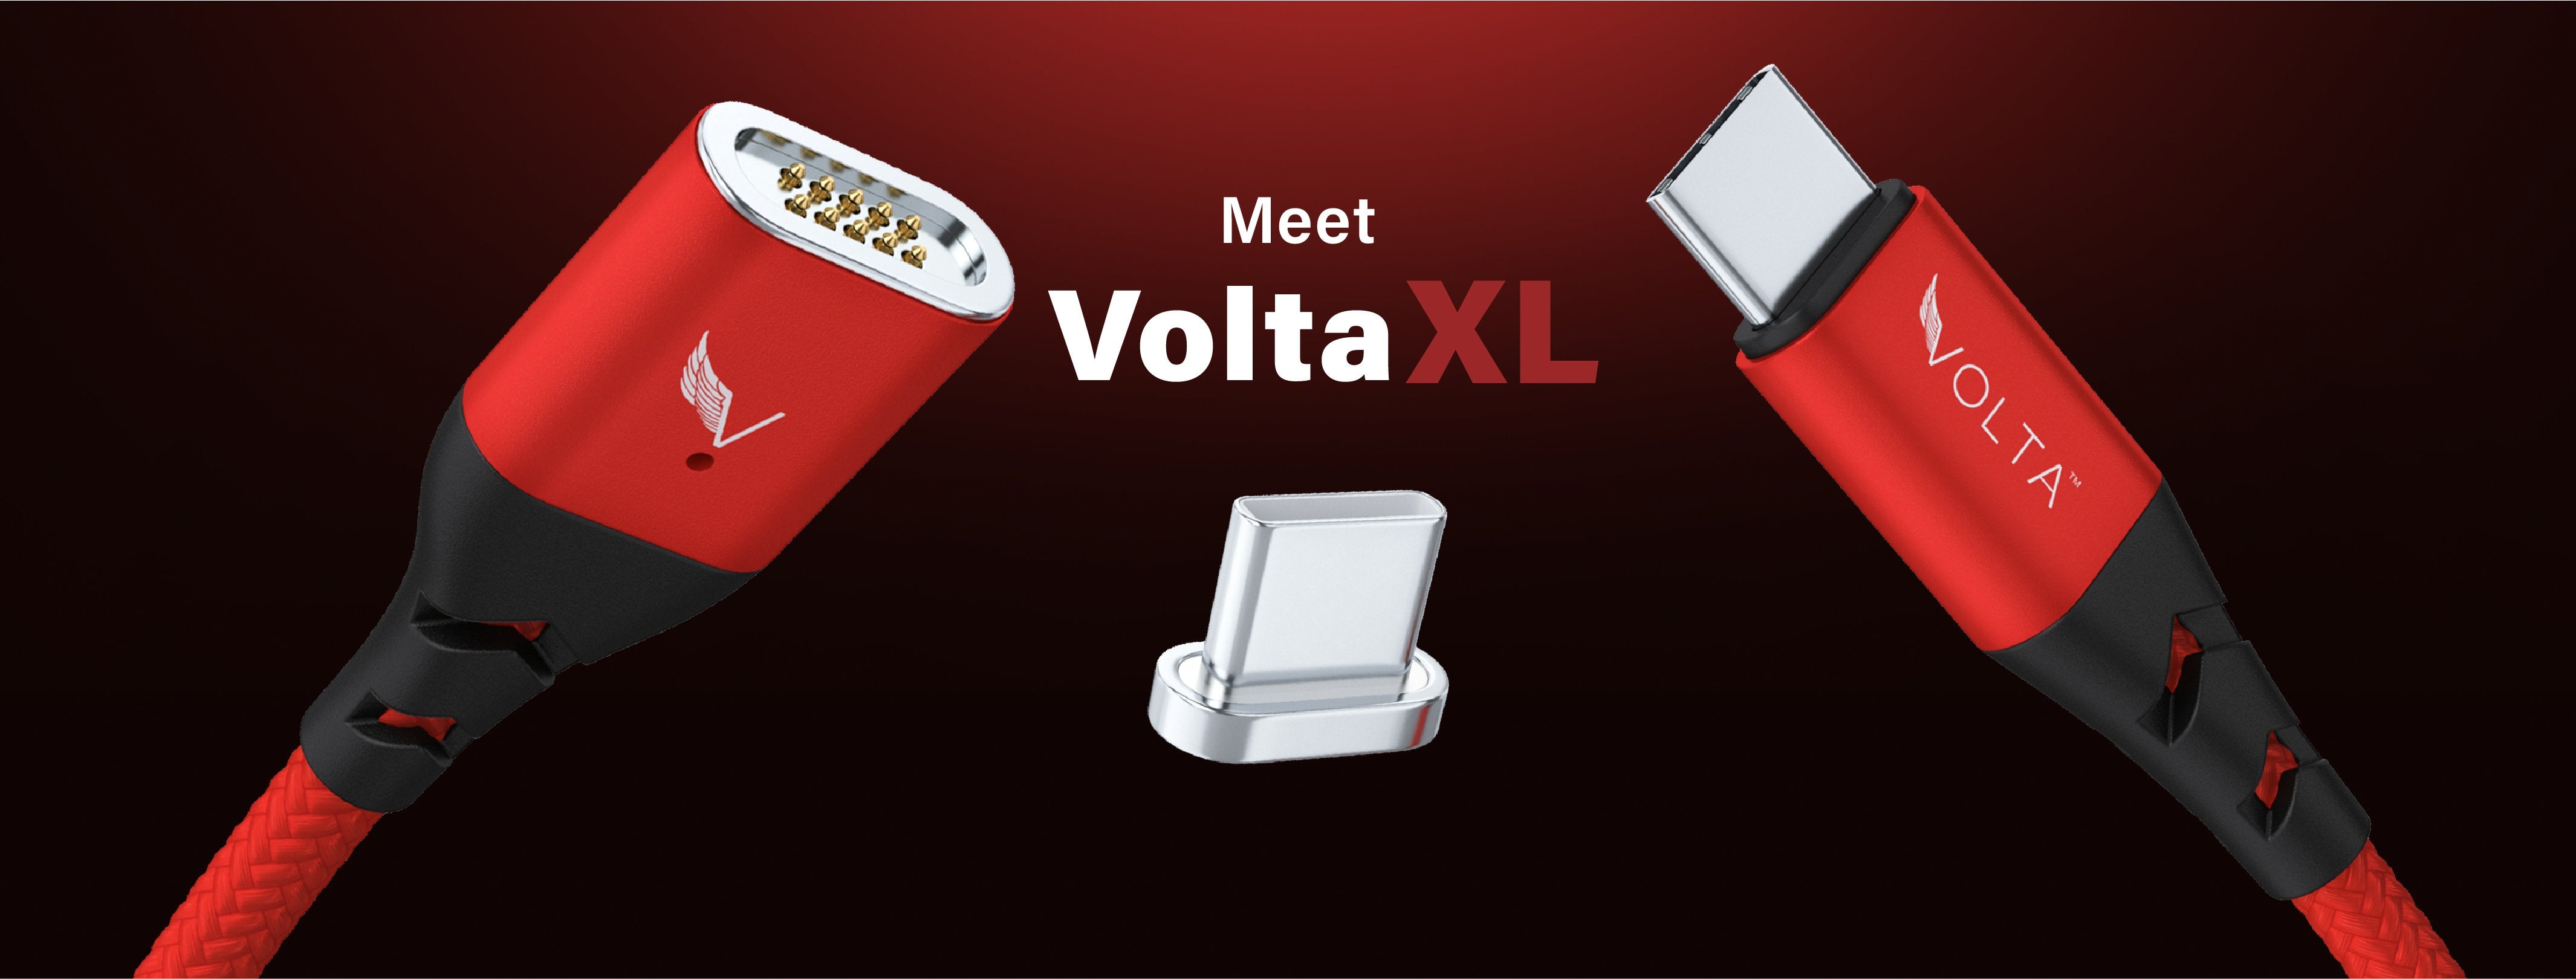 Volta XL- Strength. Versatile. Beautiful. Fast. Taking inspiration from the coveted, magnetically- attaching MagSafe design.